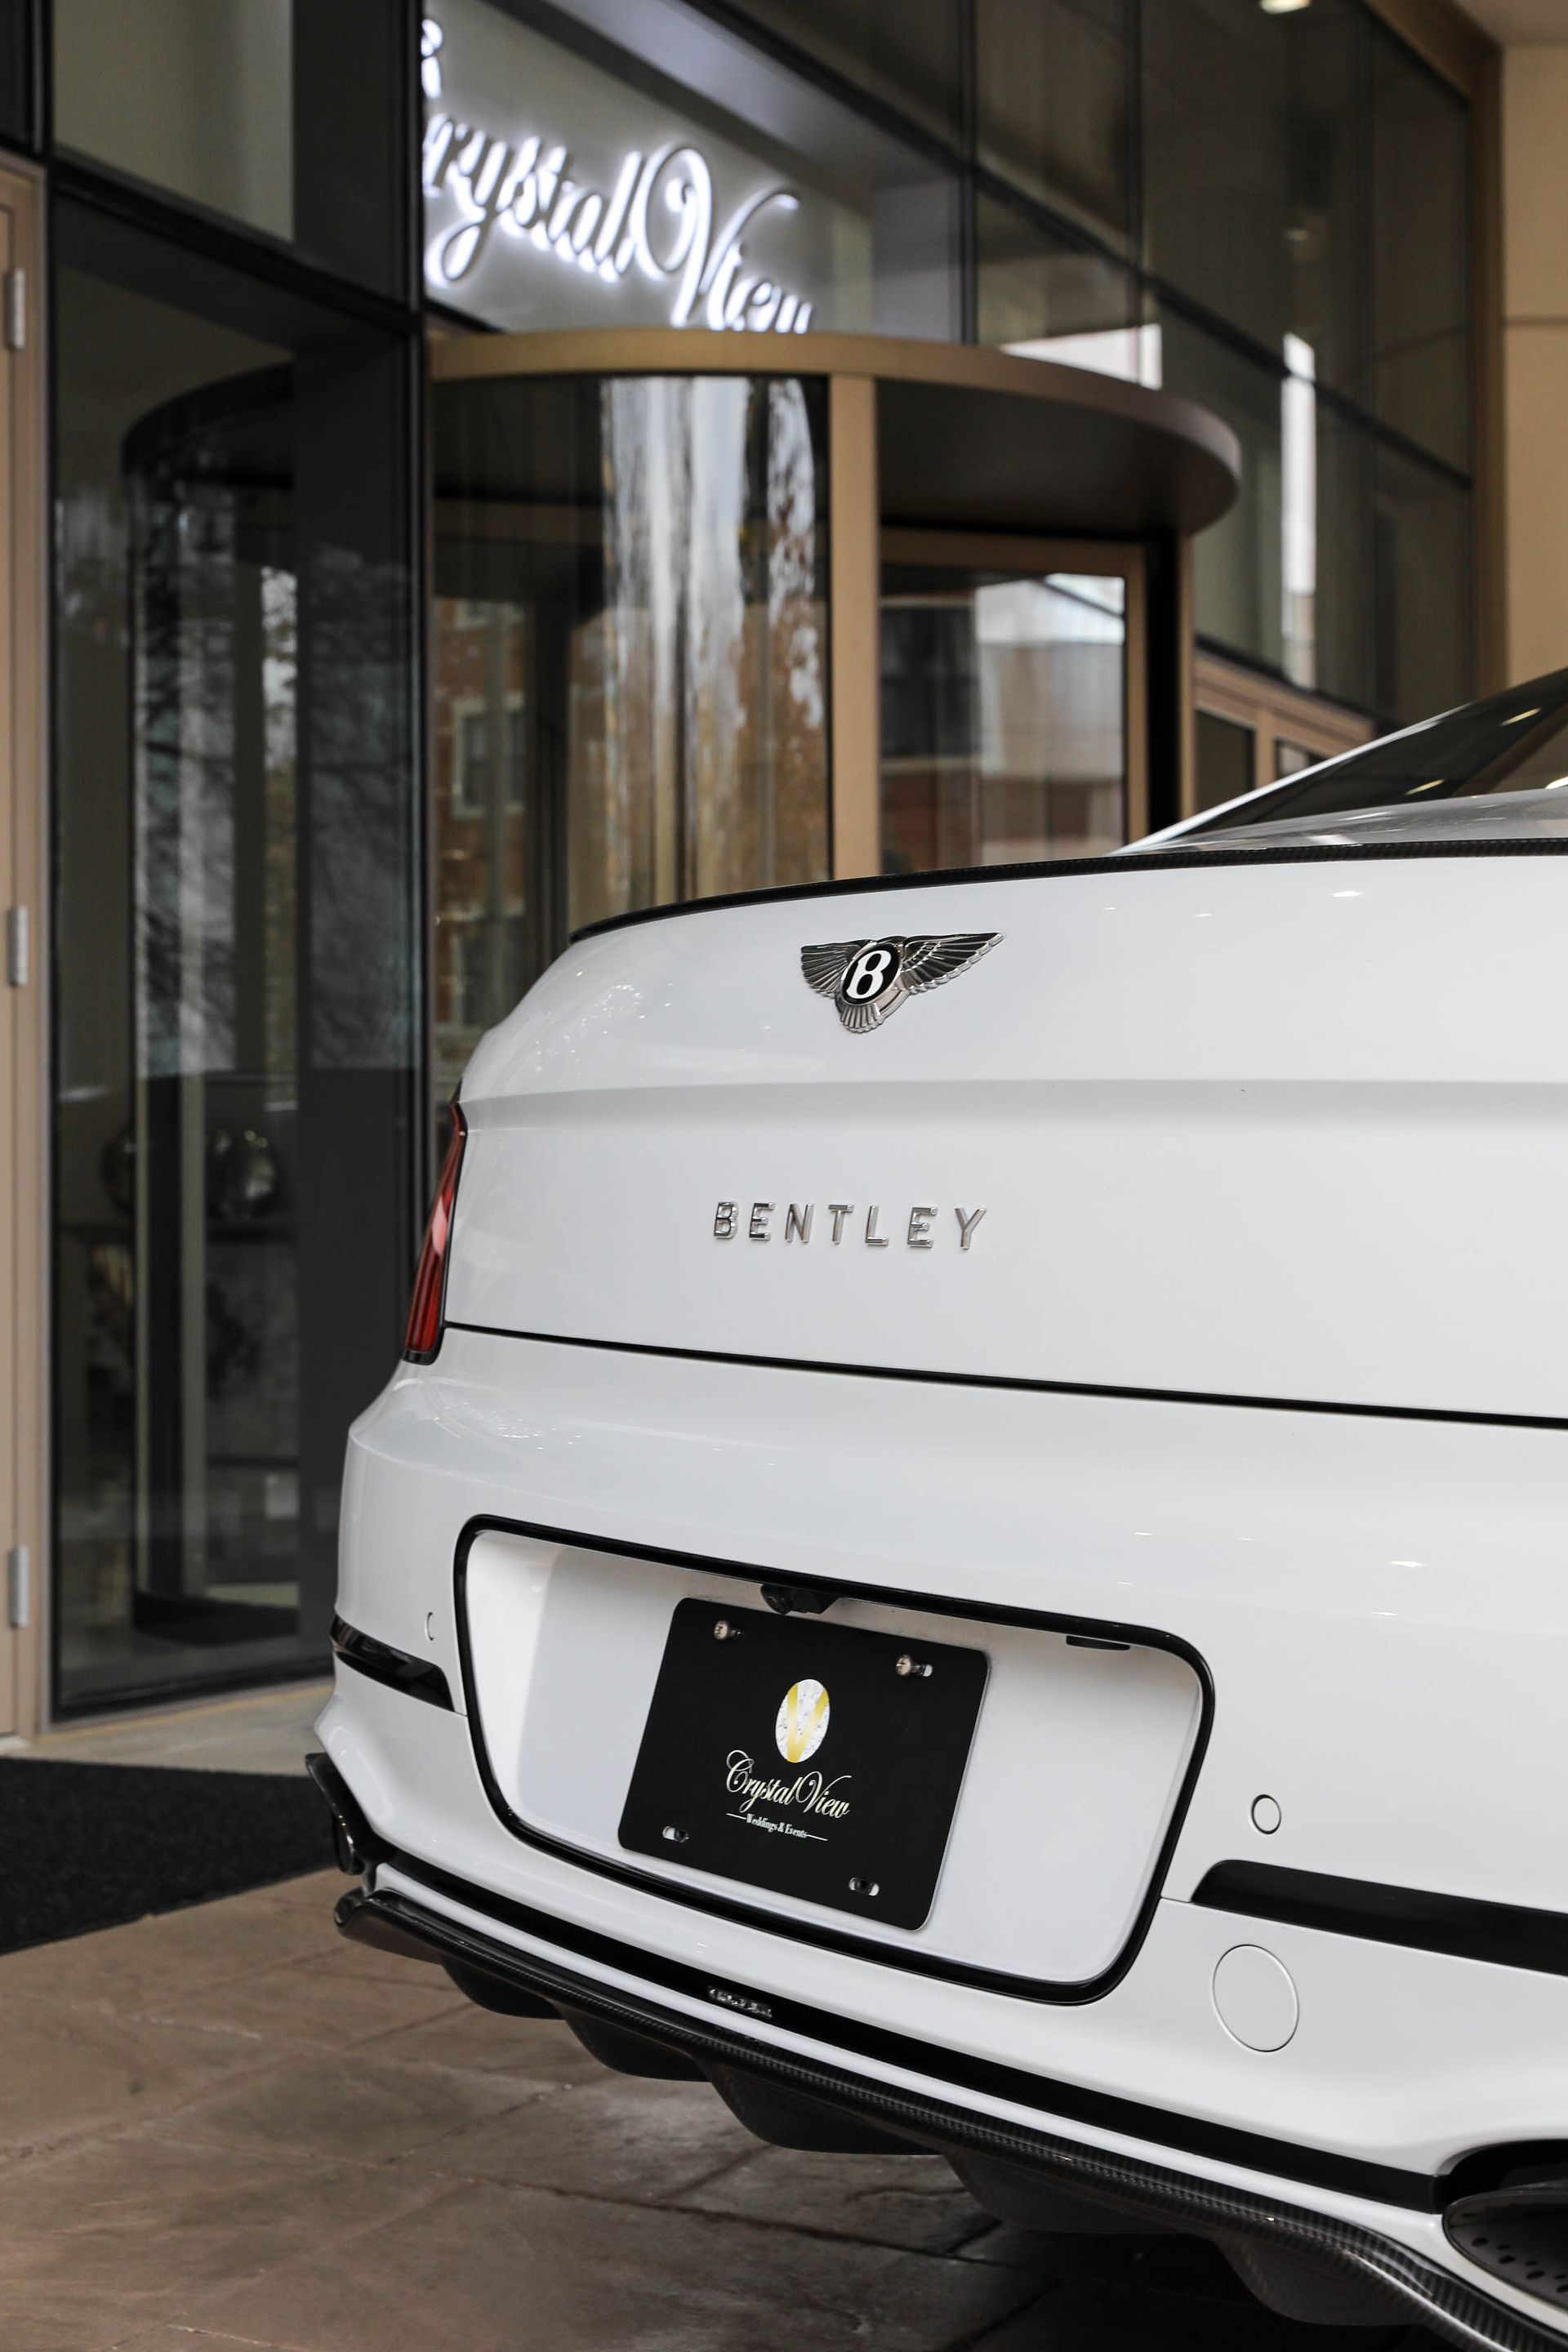 back end of a Bentley Flying Spur luxury car photo opportunities